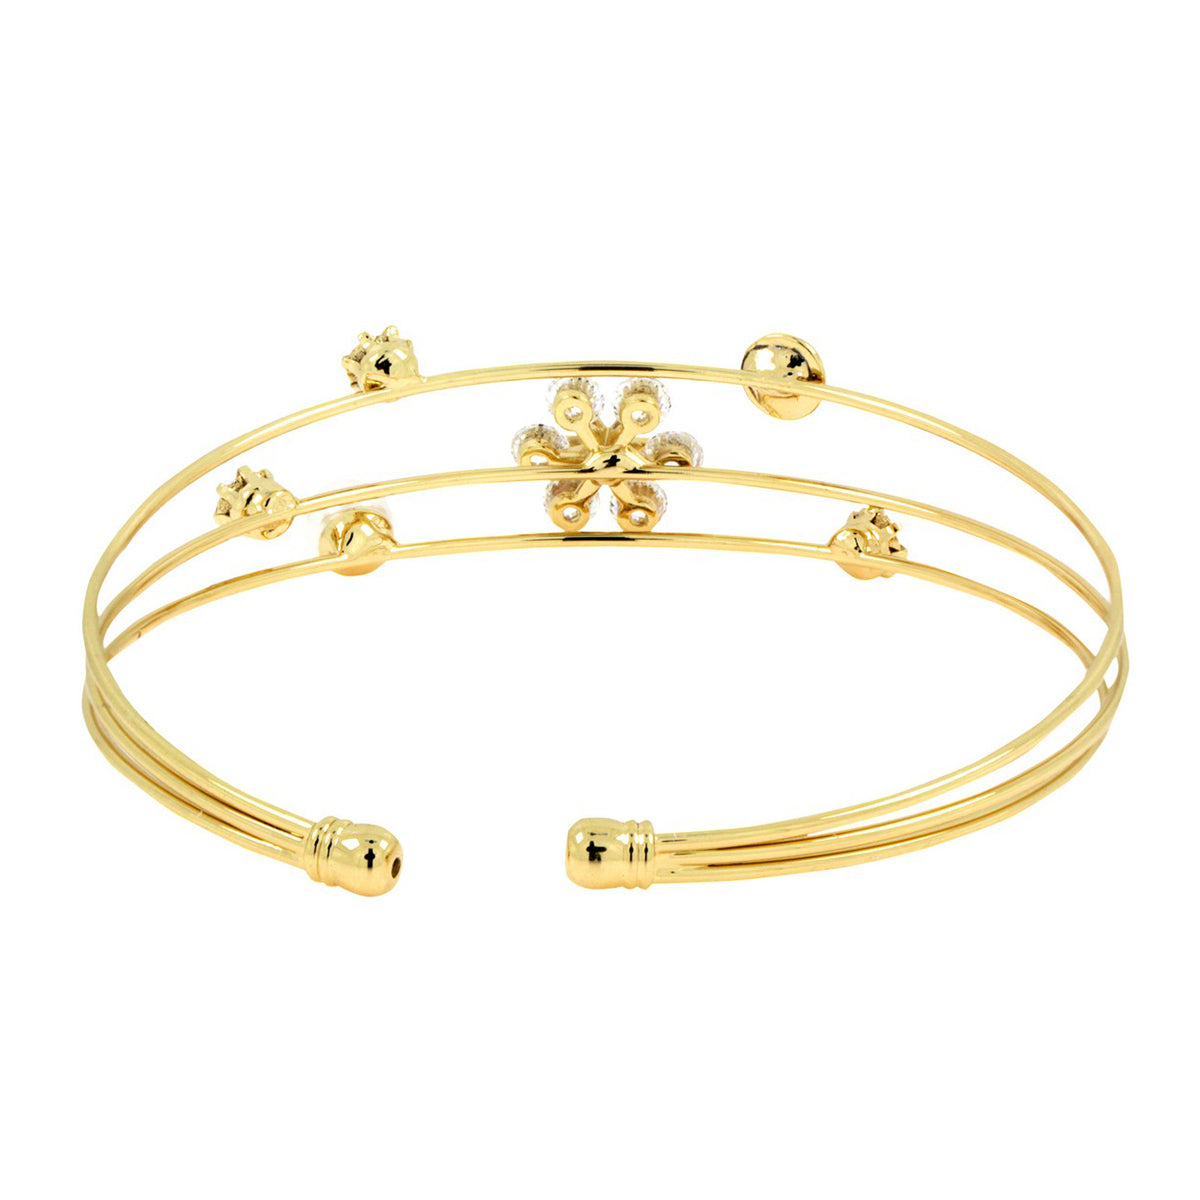 10K gold open wire bangle with snake's head - IOSSELLIANI microcosmo